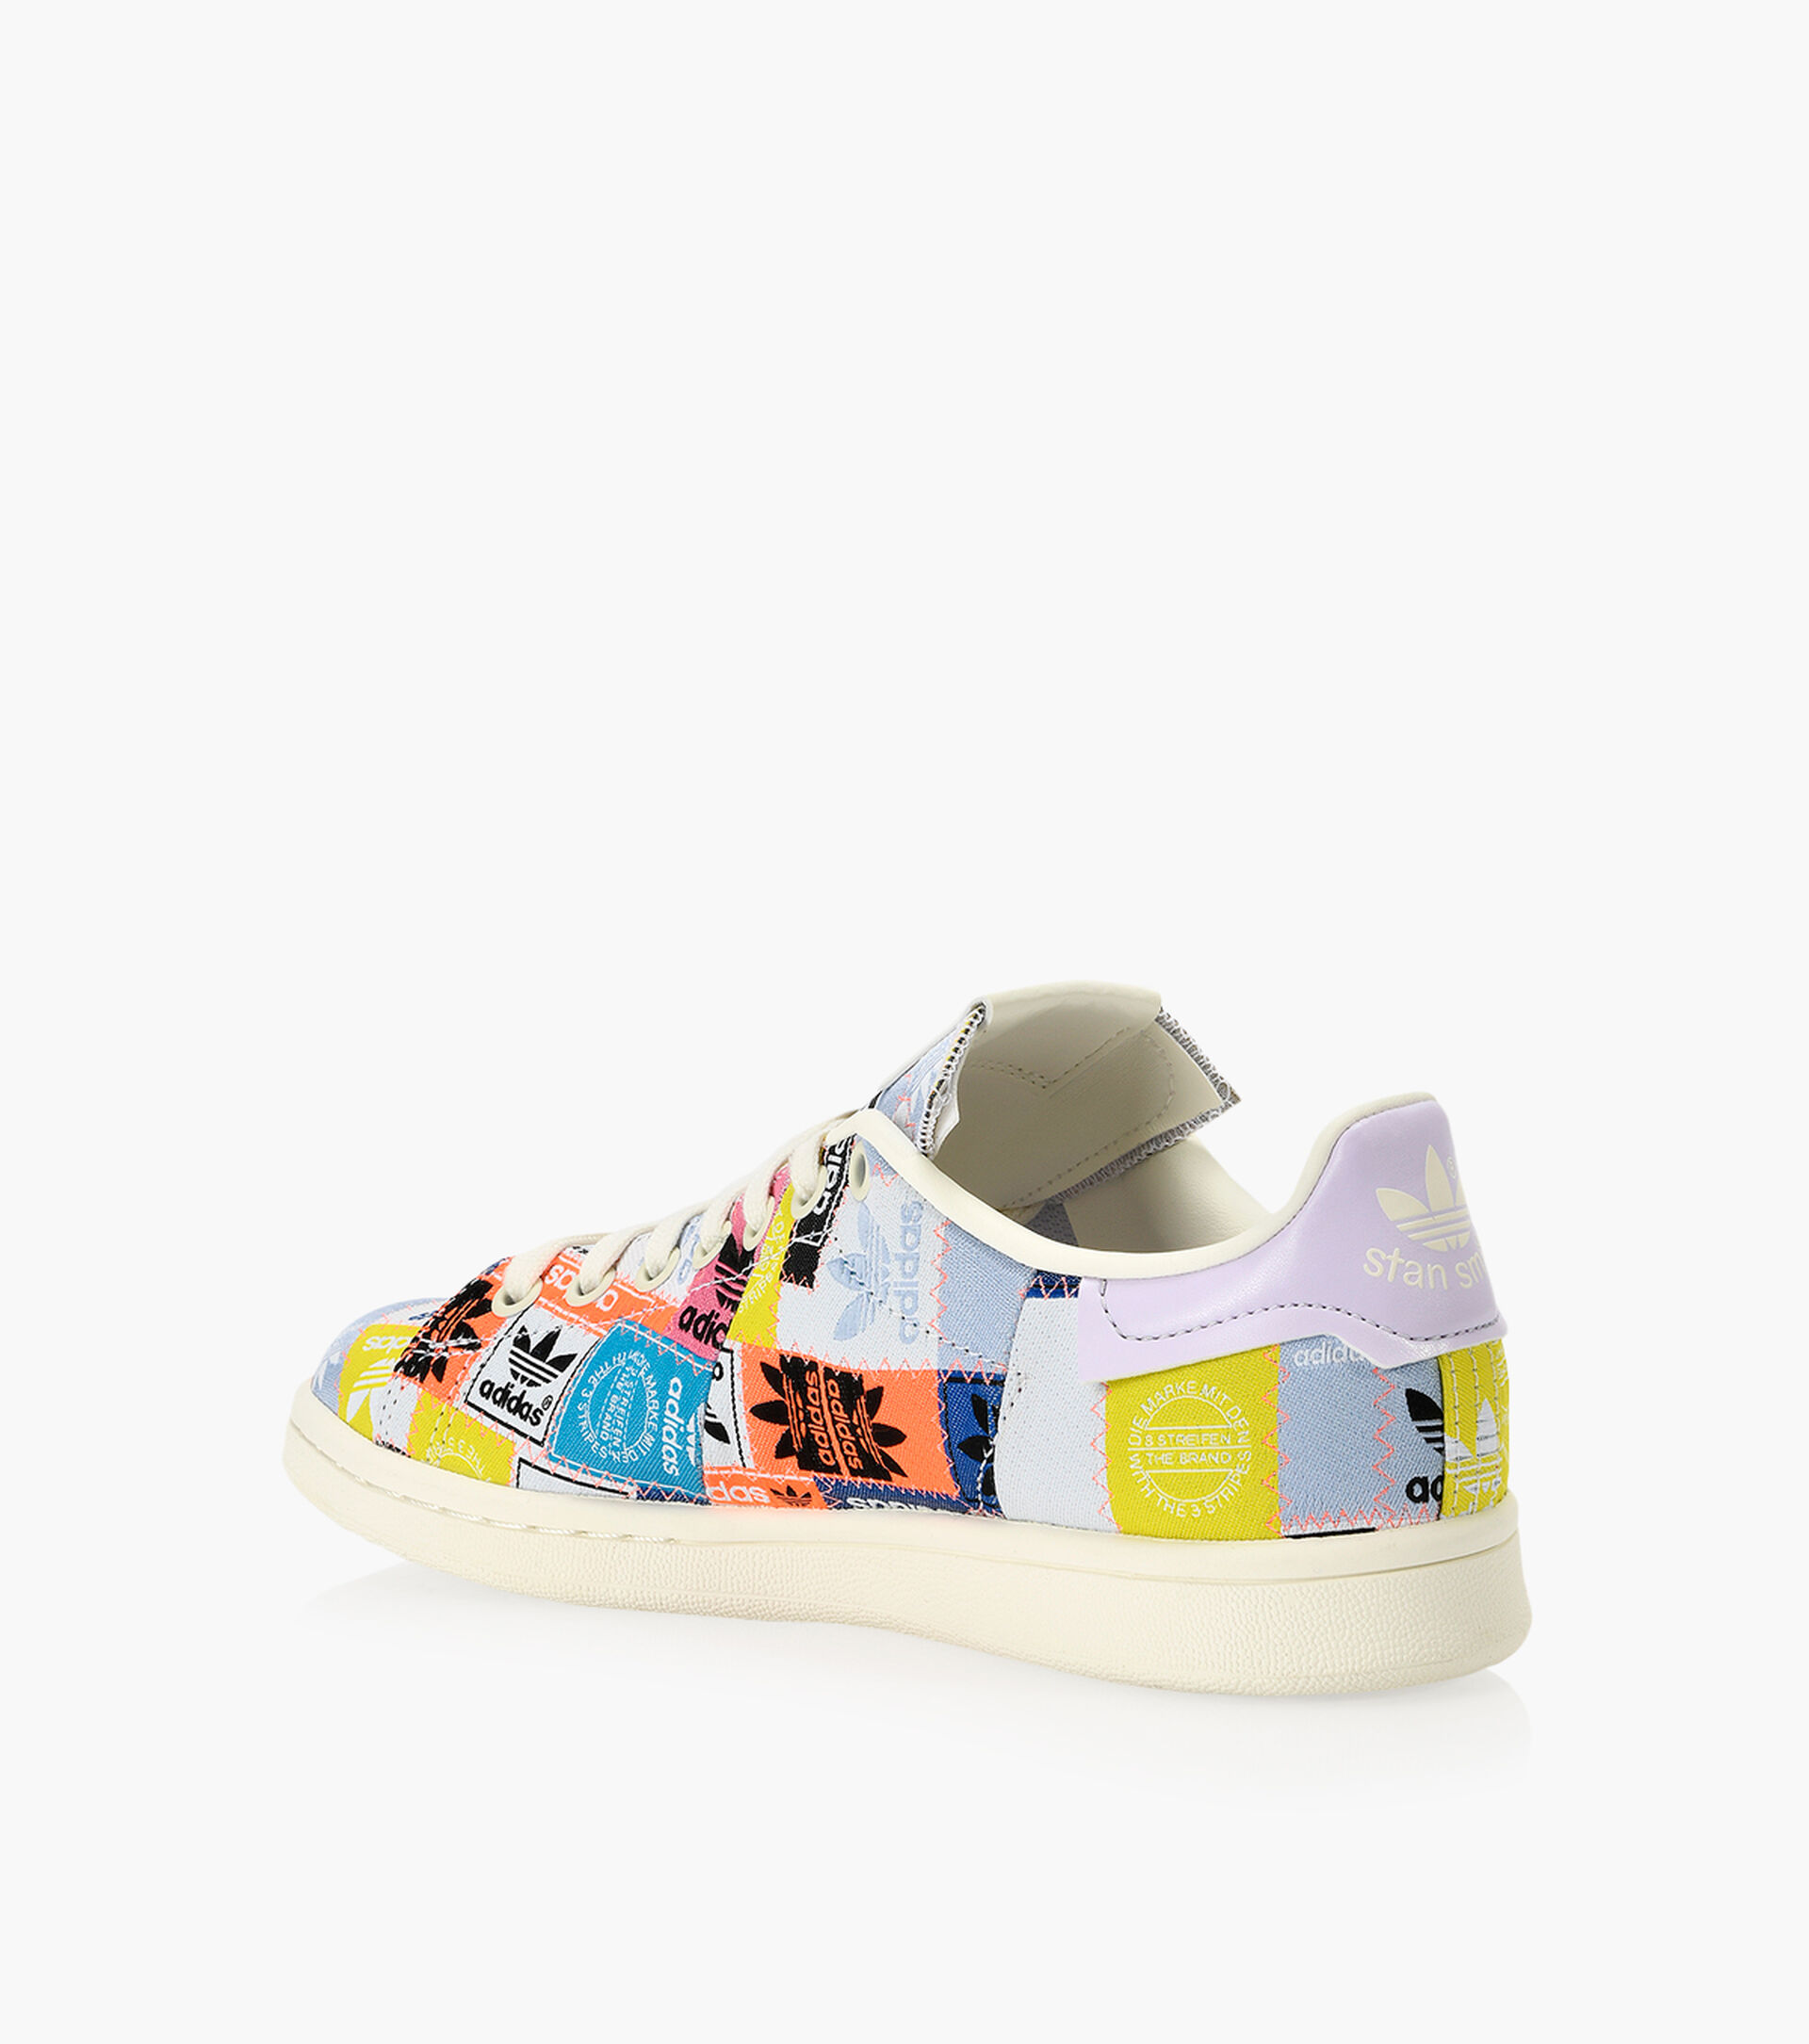 ADIDAS STAN SMITH - Multicolour Fabric | Browns Shoes